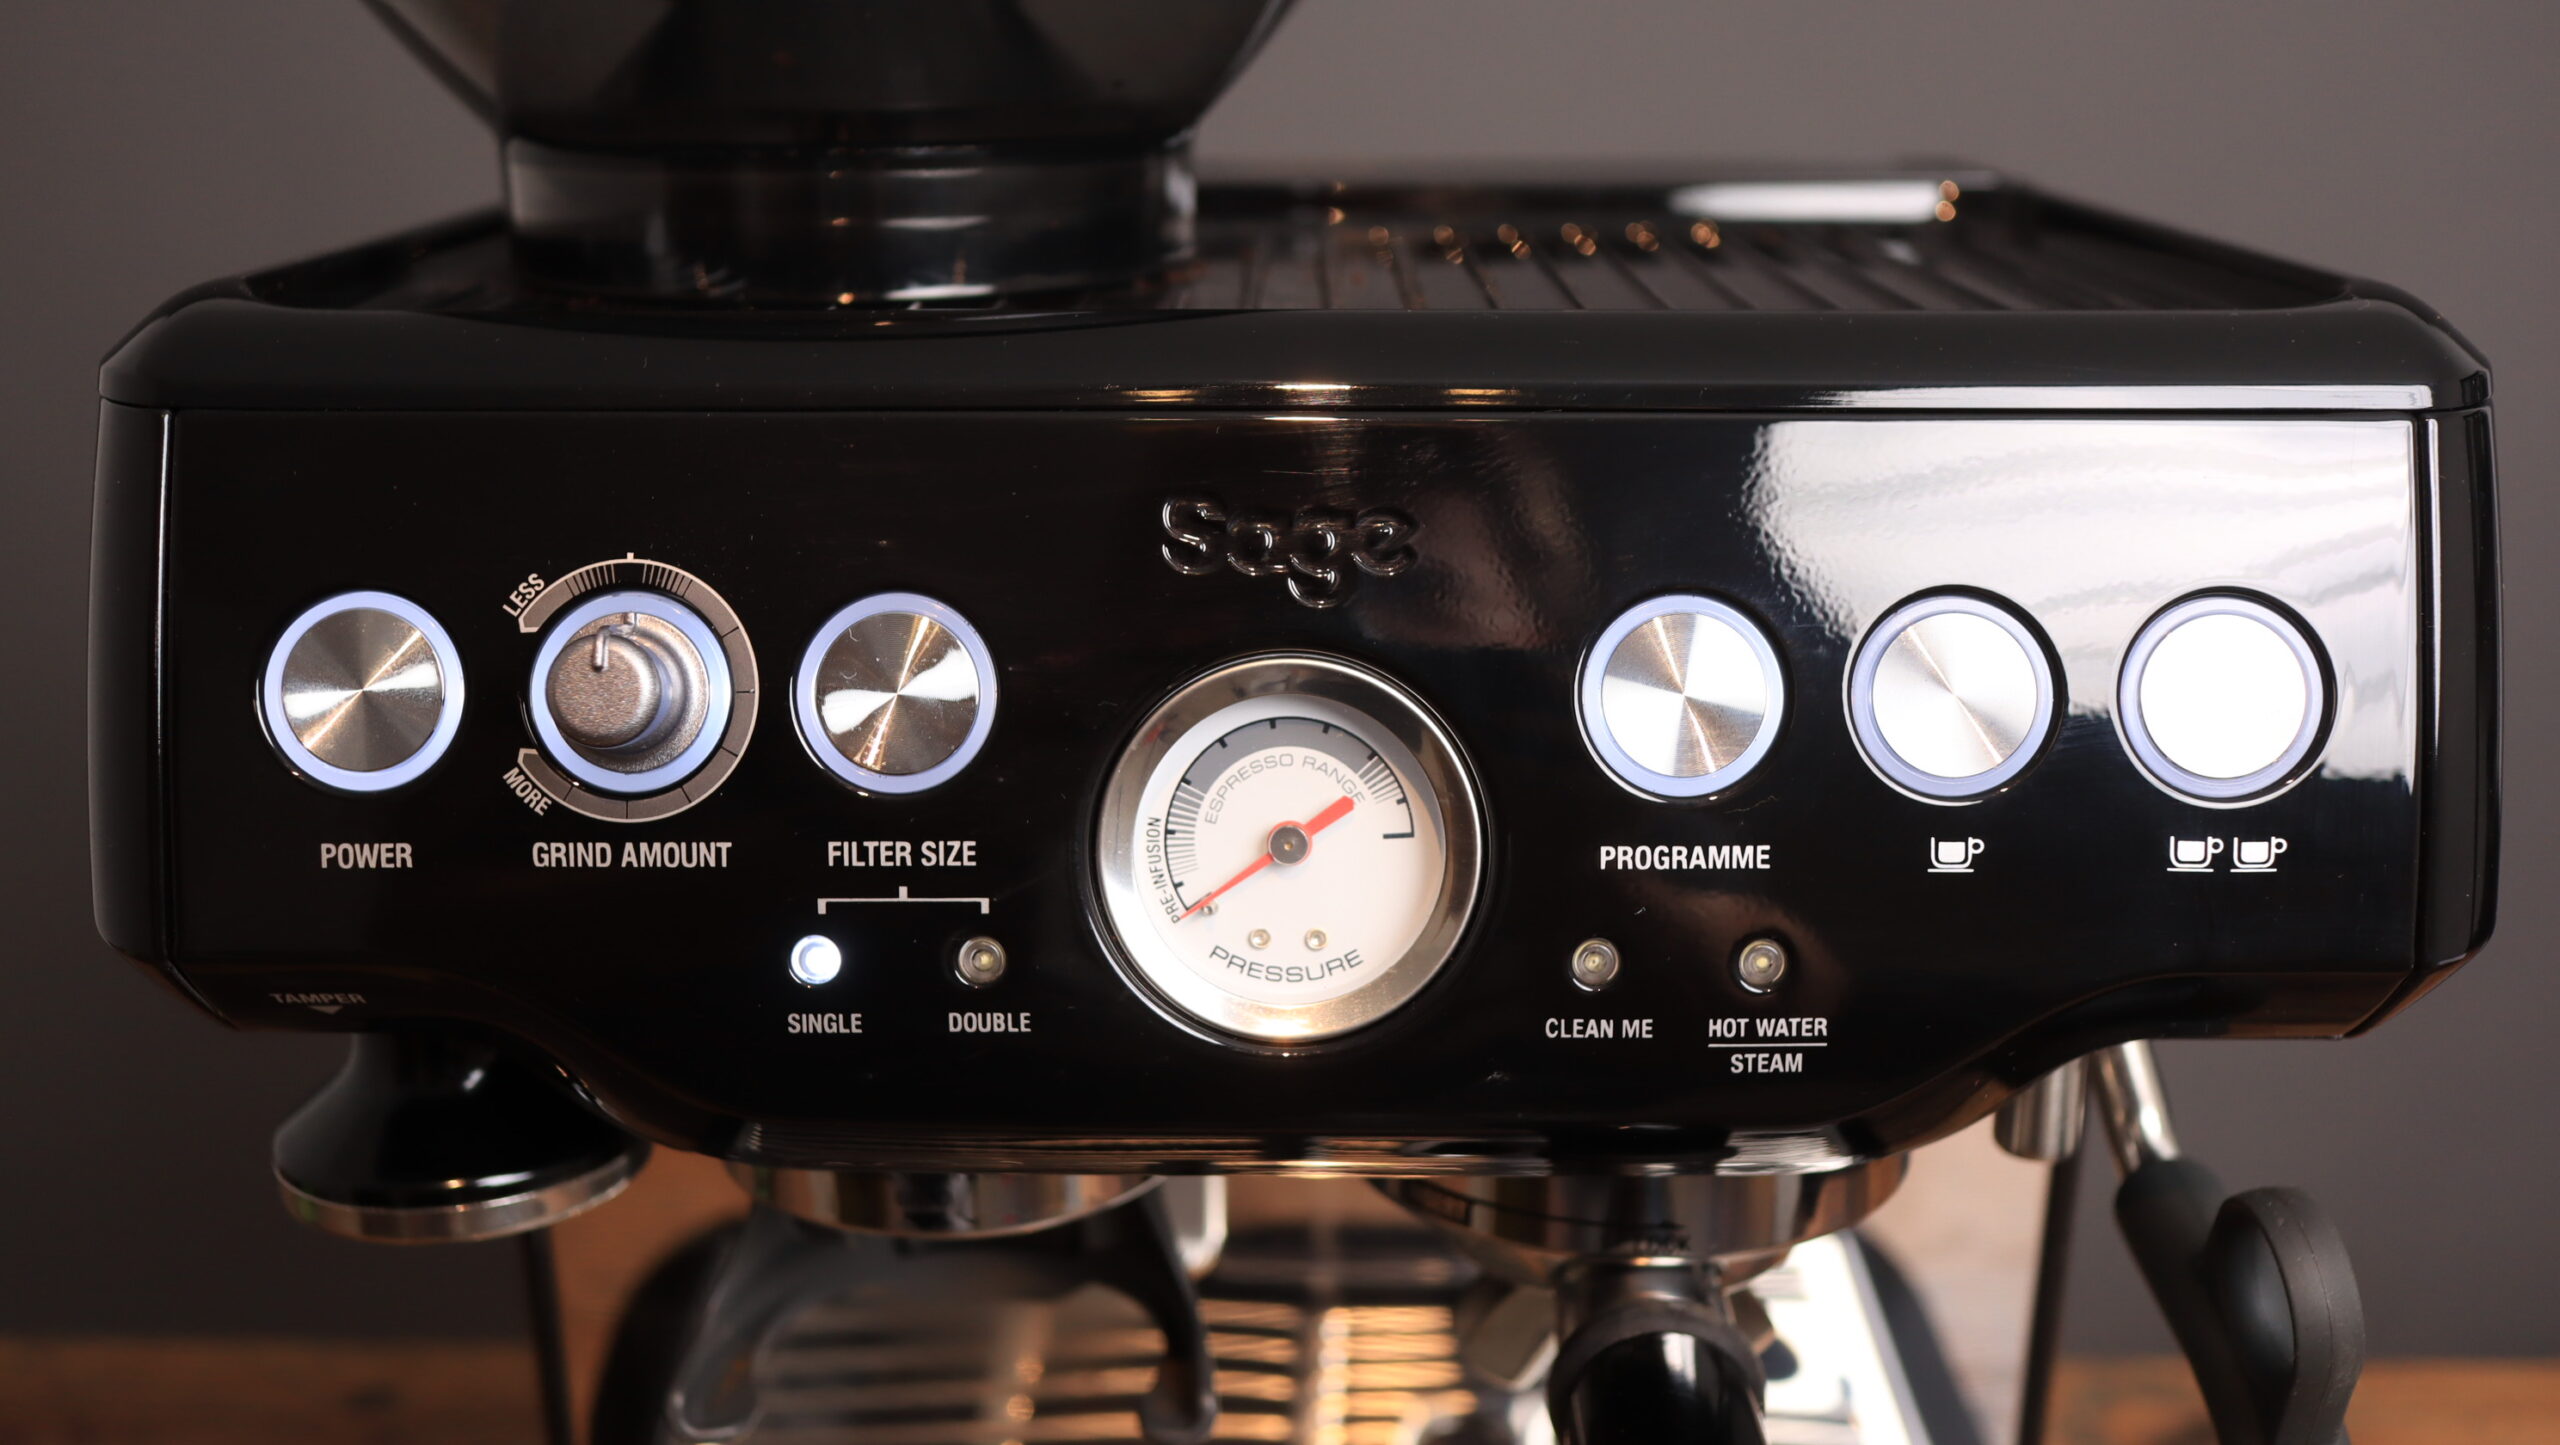 Breville Barista Express front panel